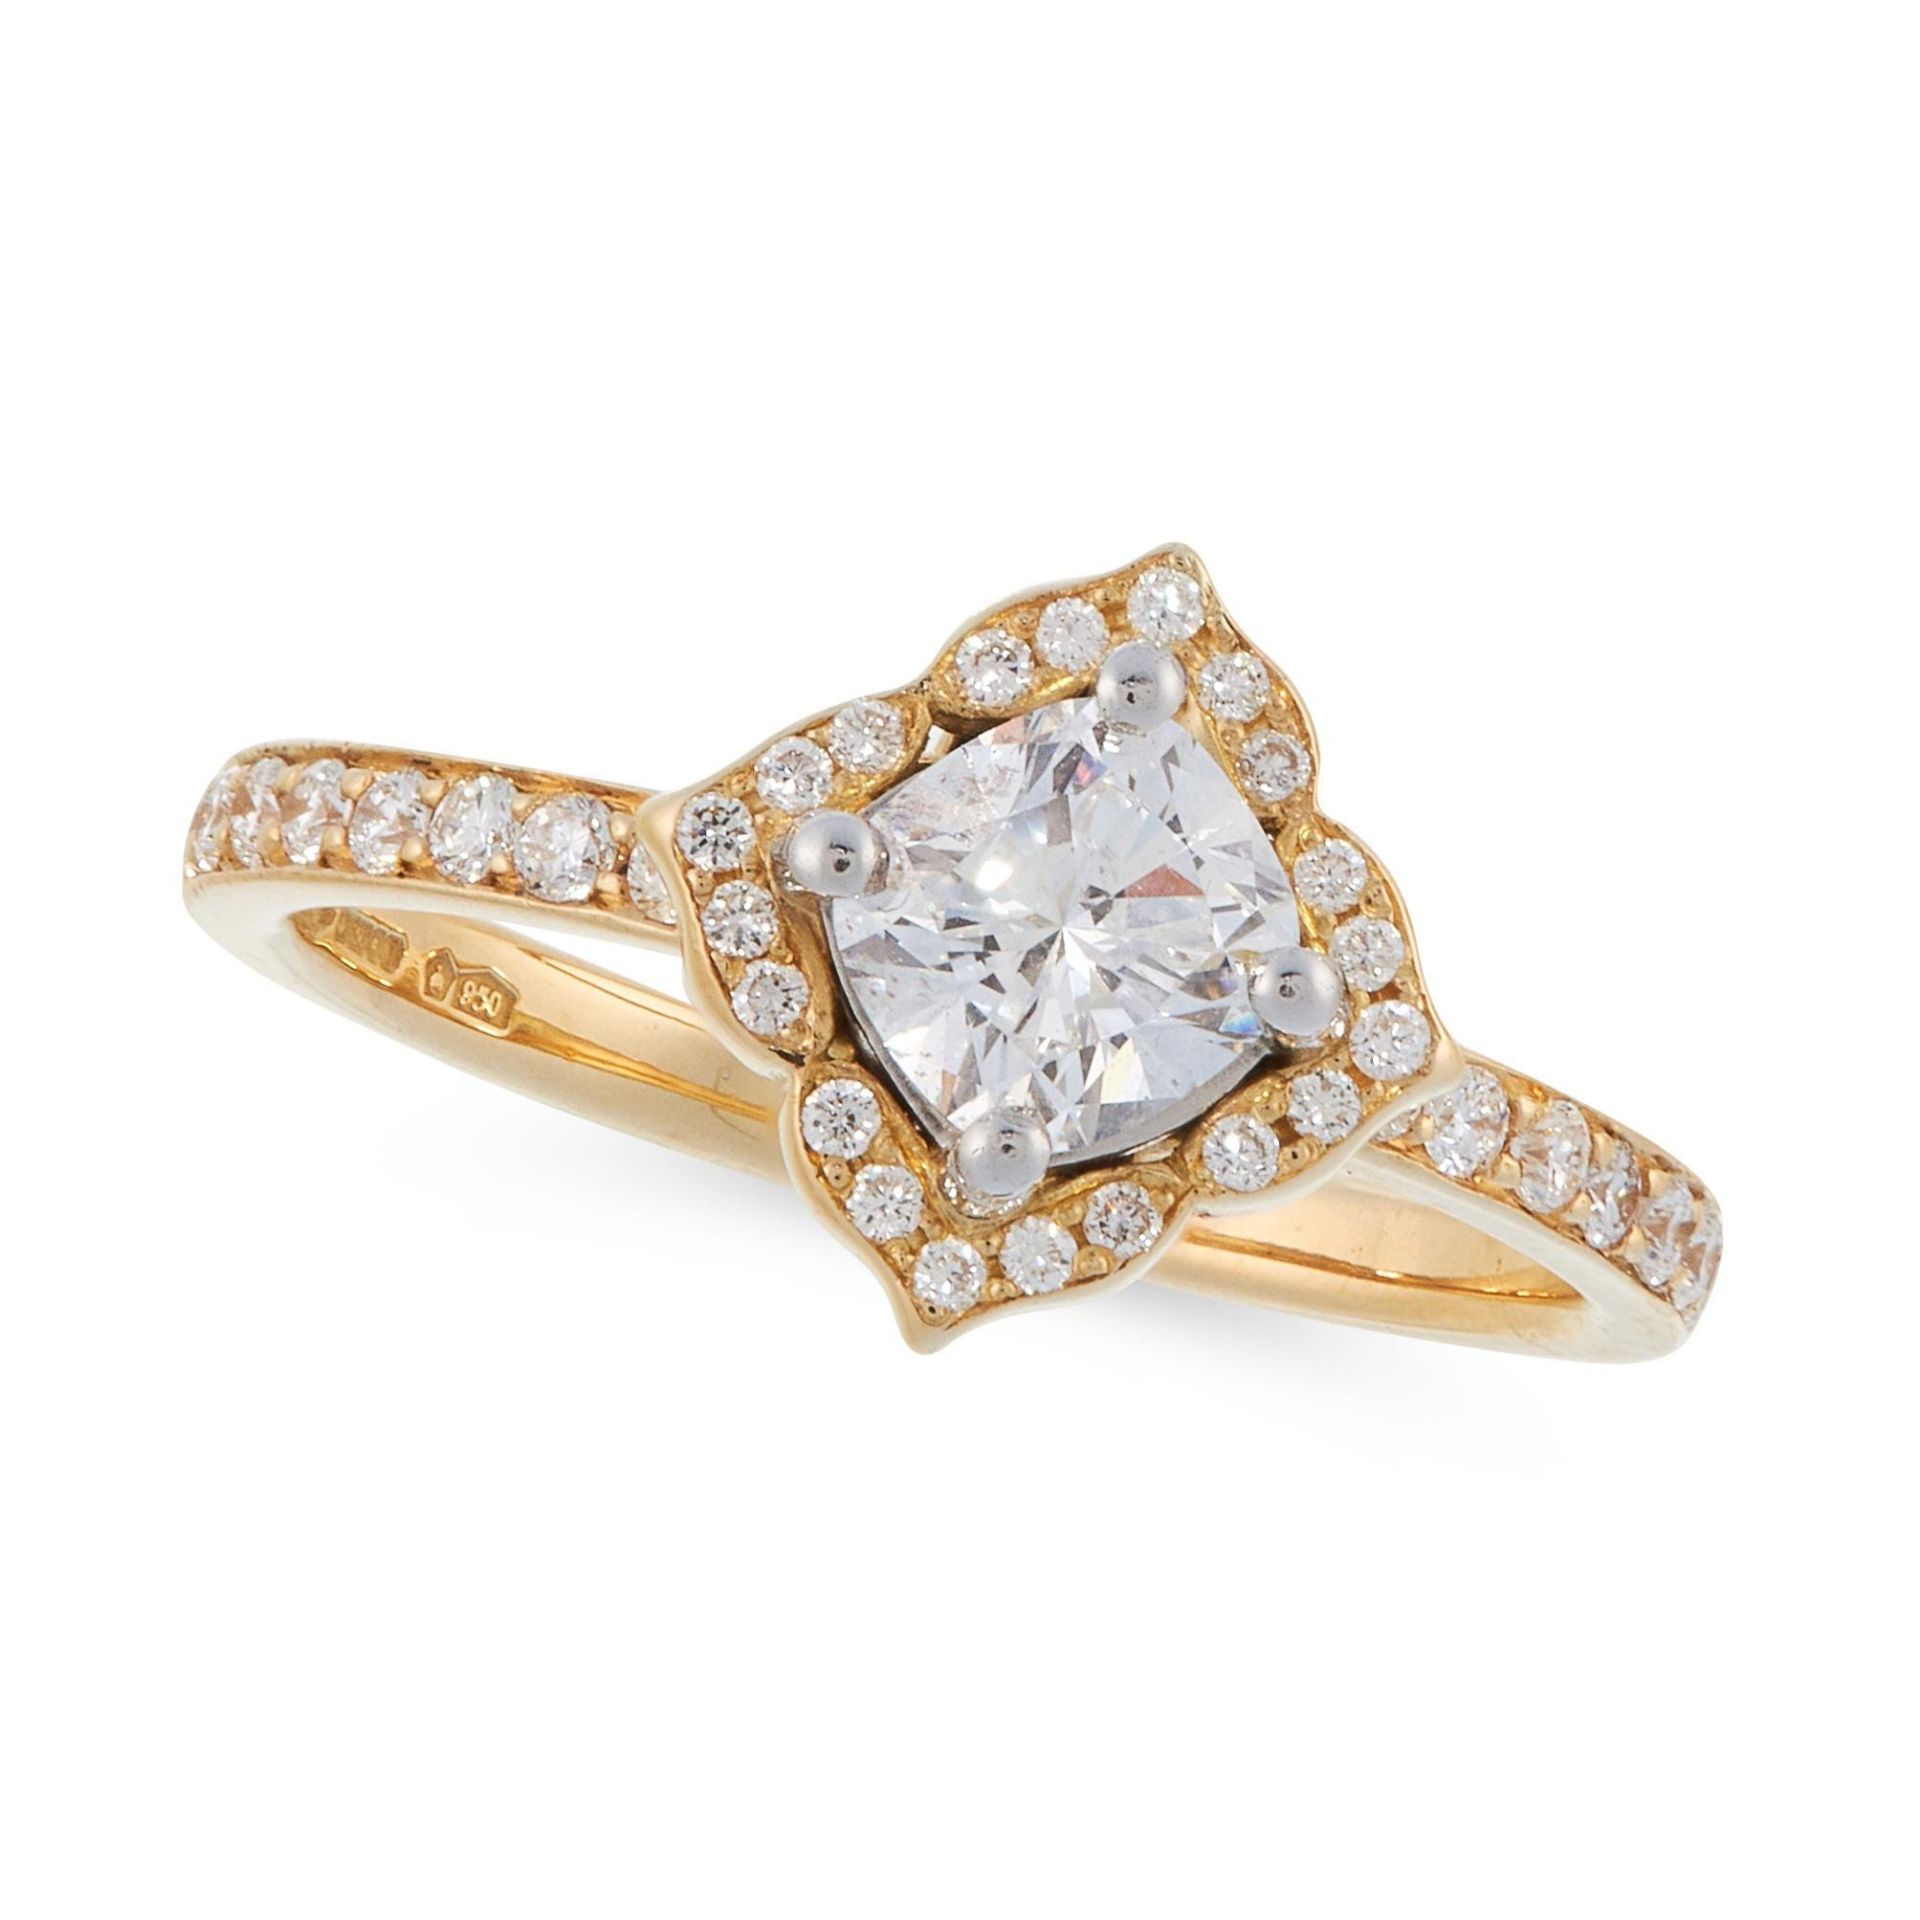 DIAMOND ENGAGEMENT RING in 18ct yellow gold, set with a cushion cut diamond of 0.59 carats in a